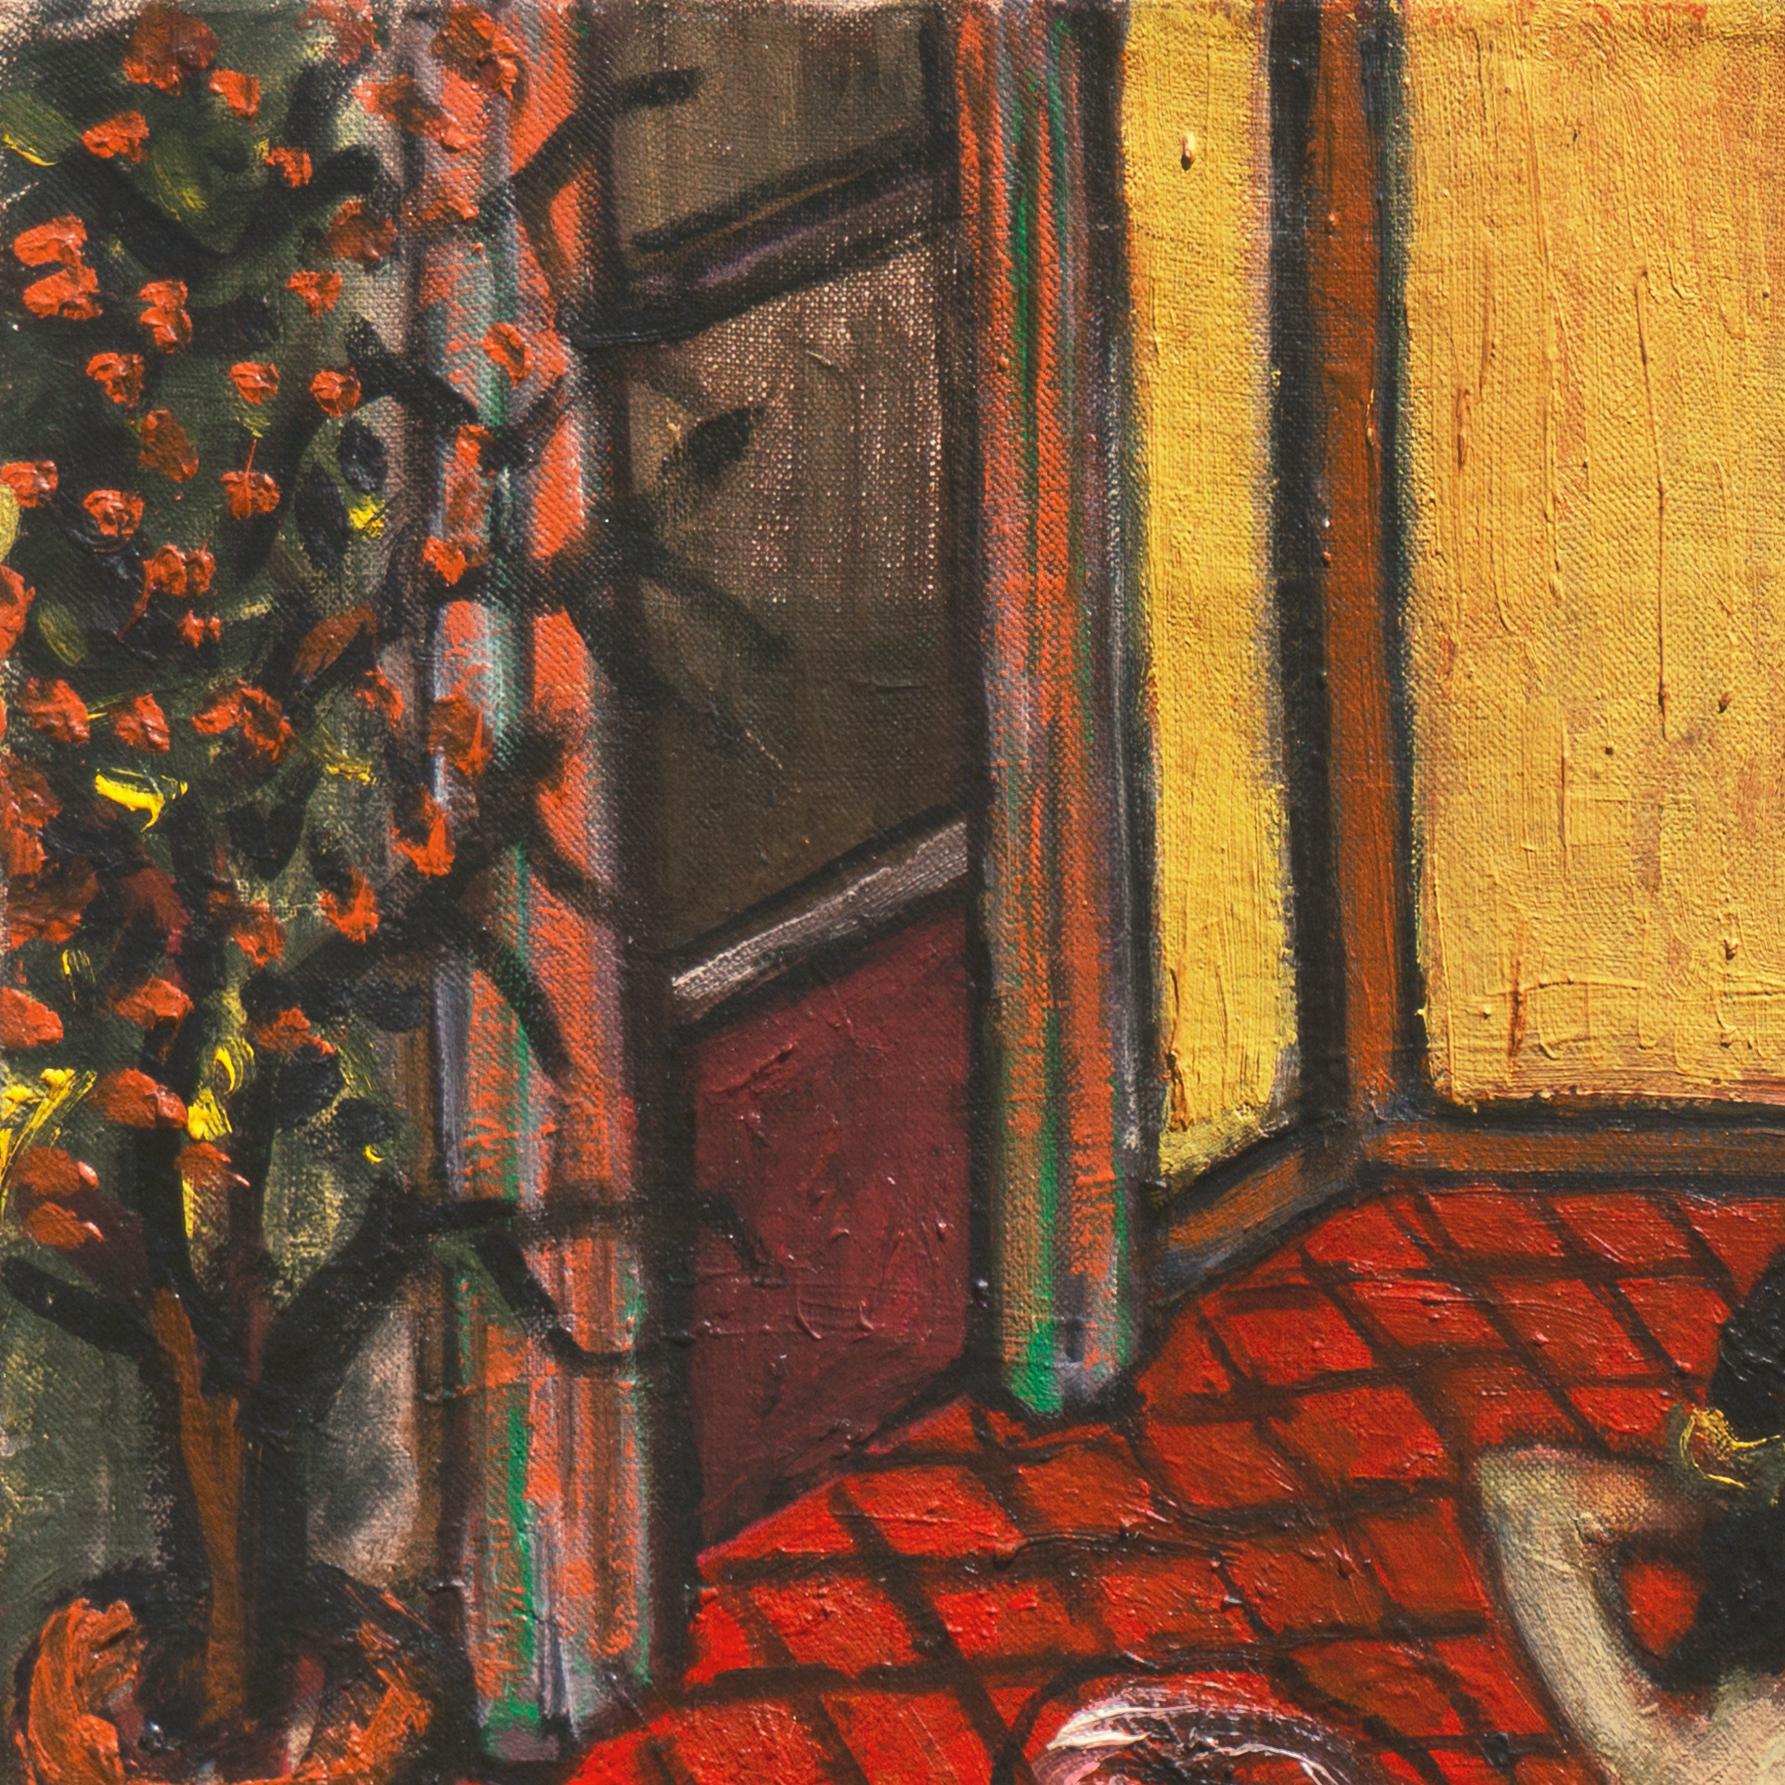 'Nude in Interior', Paris, Académie Chaumière, Carnegie Museum, Expressionist - Brown Nude Painting by Sasha Moldovan